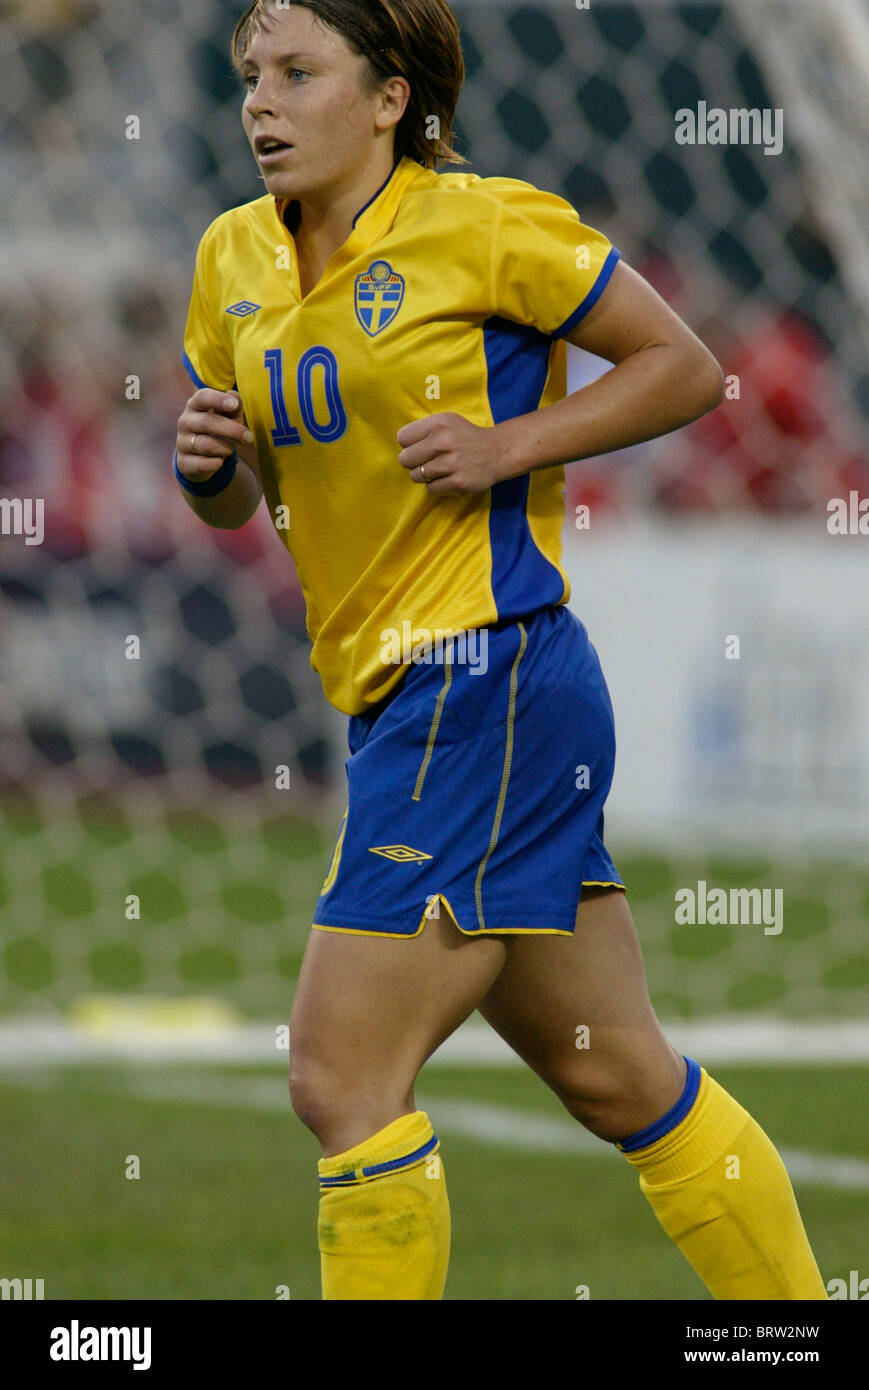 Hanna Ljungberg of Sweden in action during a 2003Women's World Cup soccer match against North Korea. Stock Photo